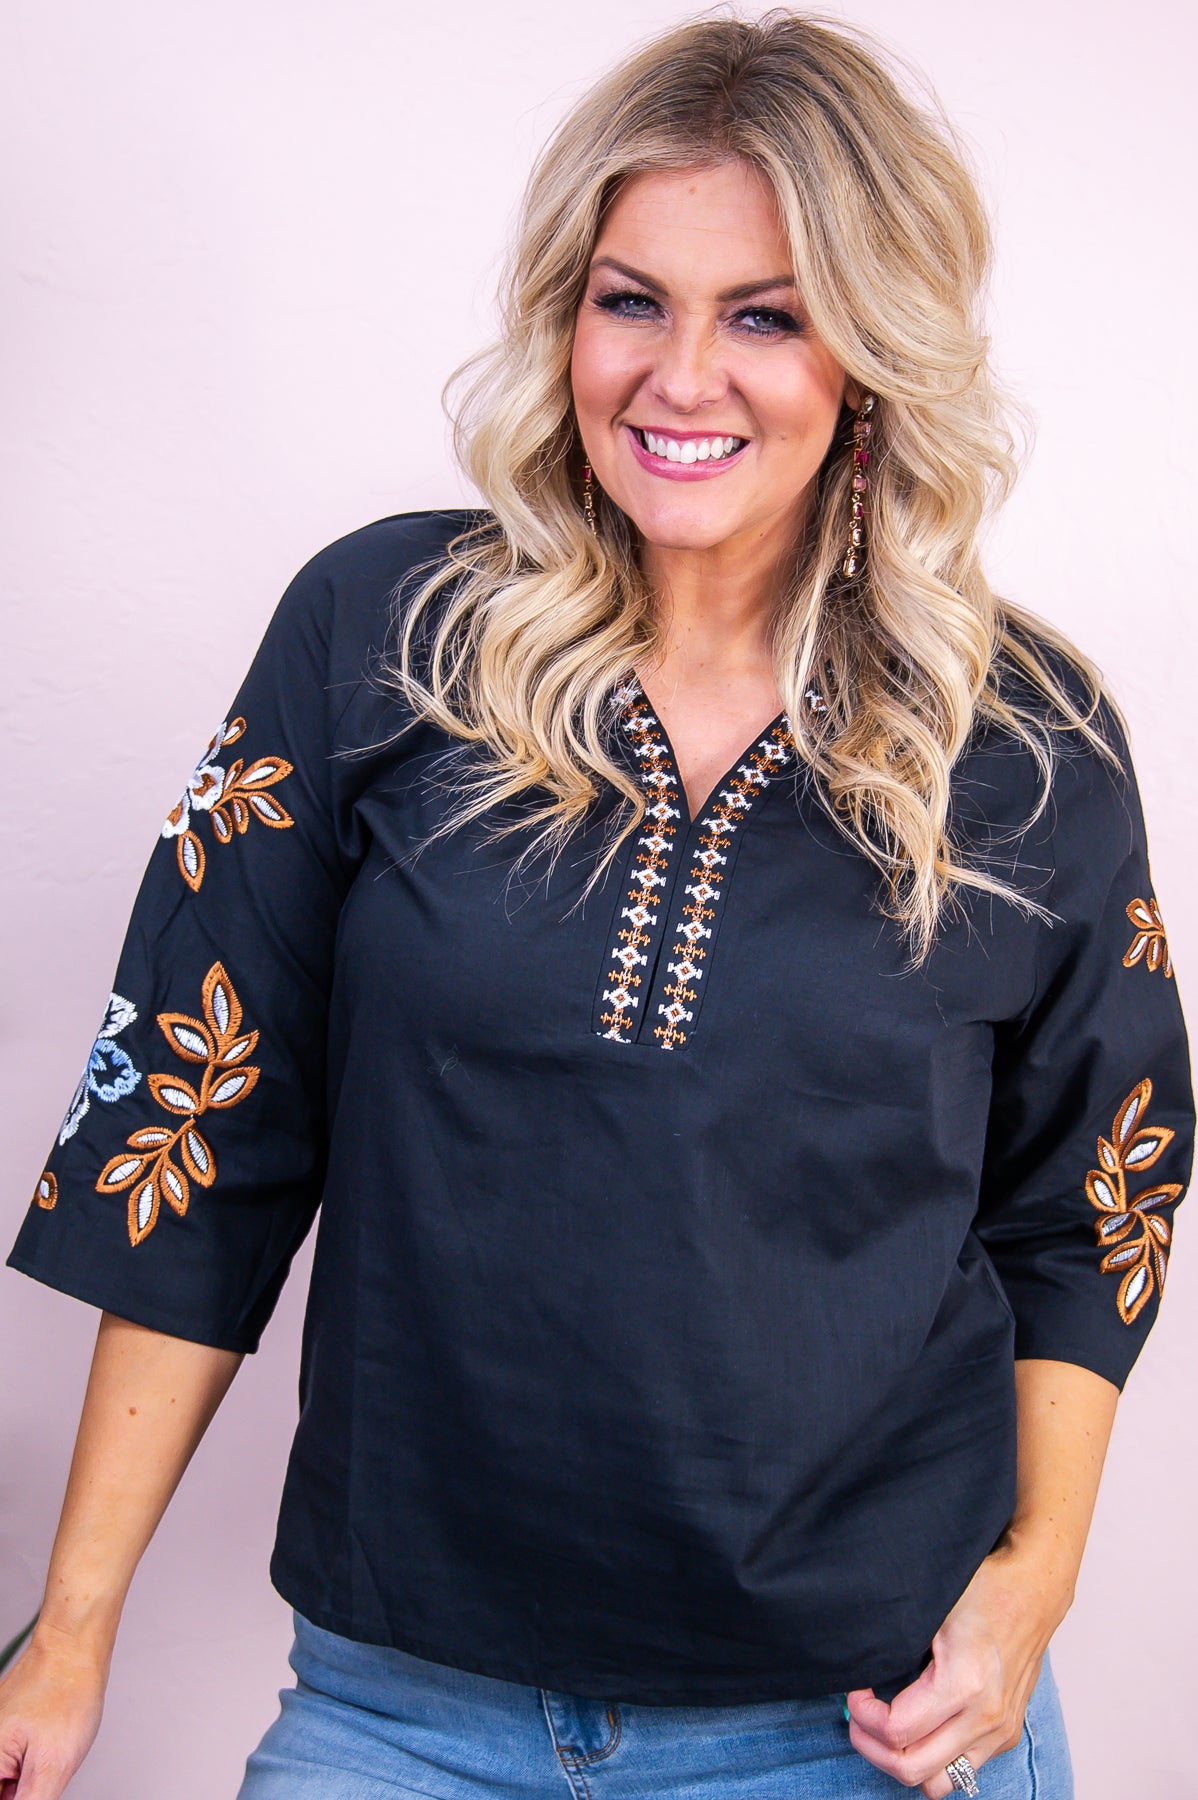 Best Day Yet Black/Brown Floral Embroidered Top - T9547BK